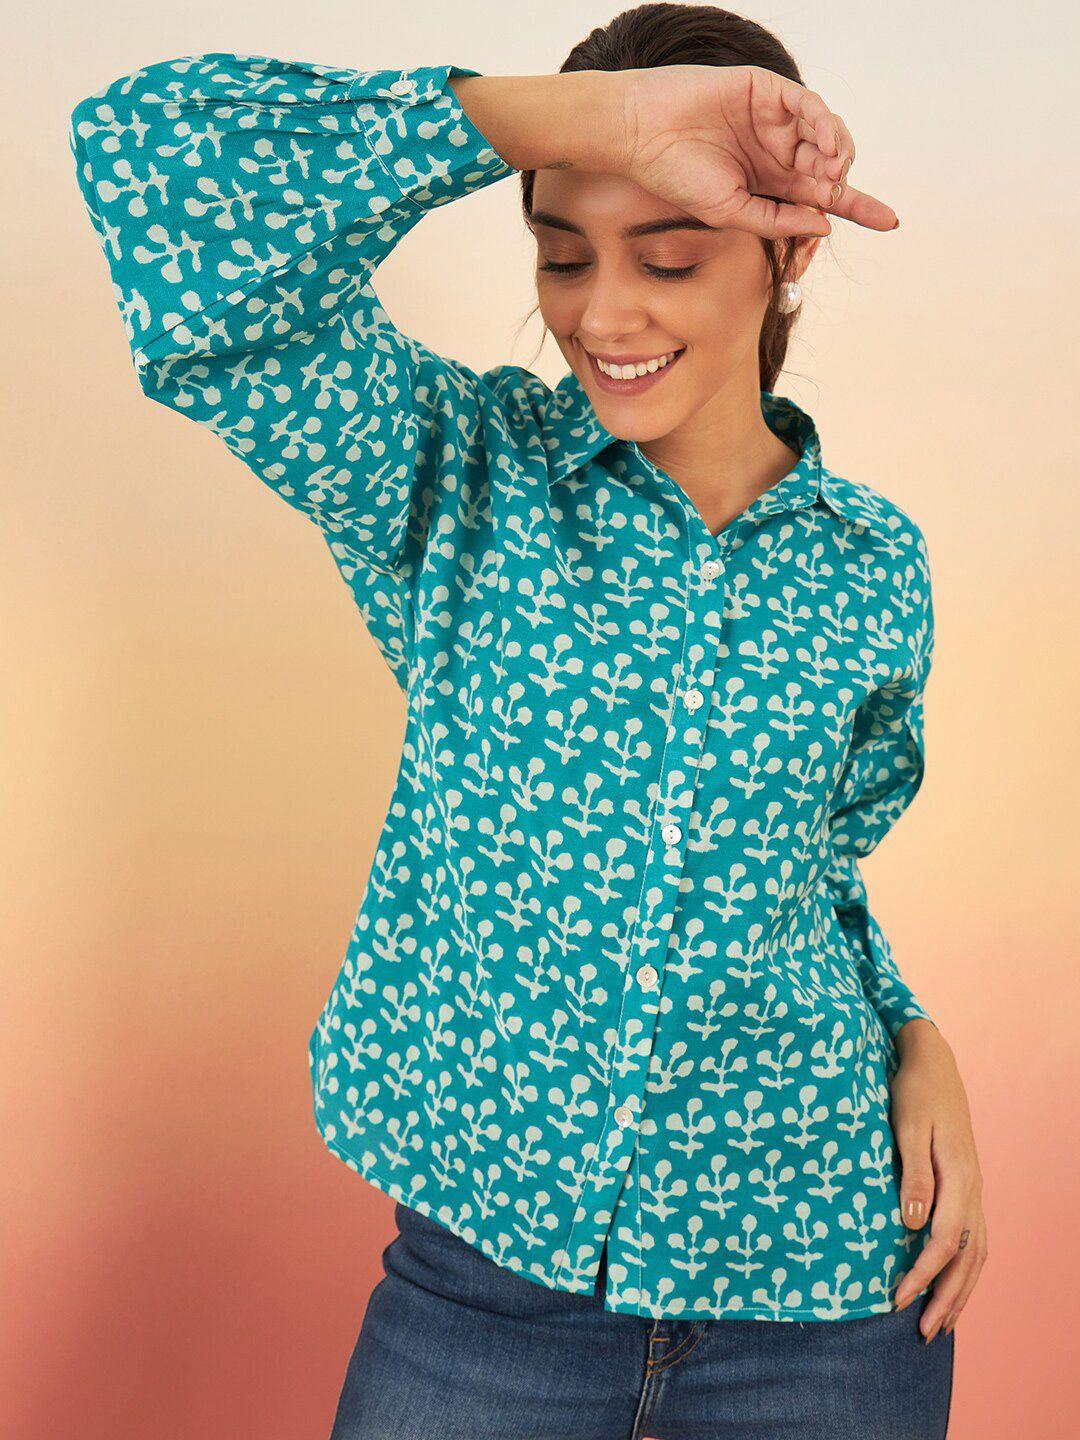 sangria turquoise blue floral print shirt style top